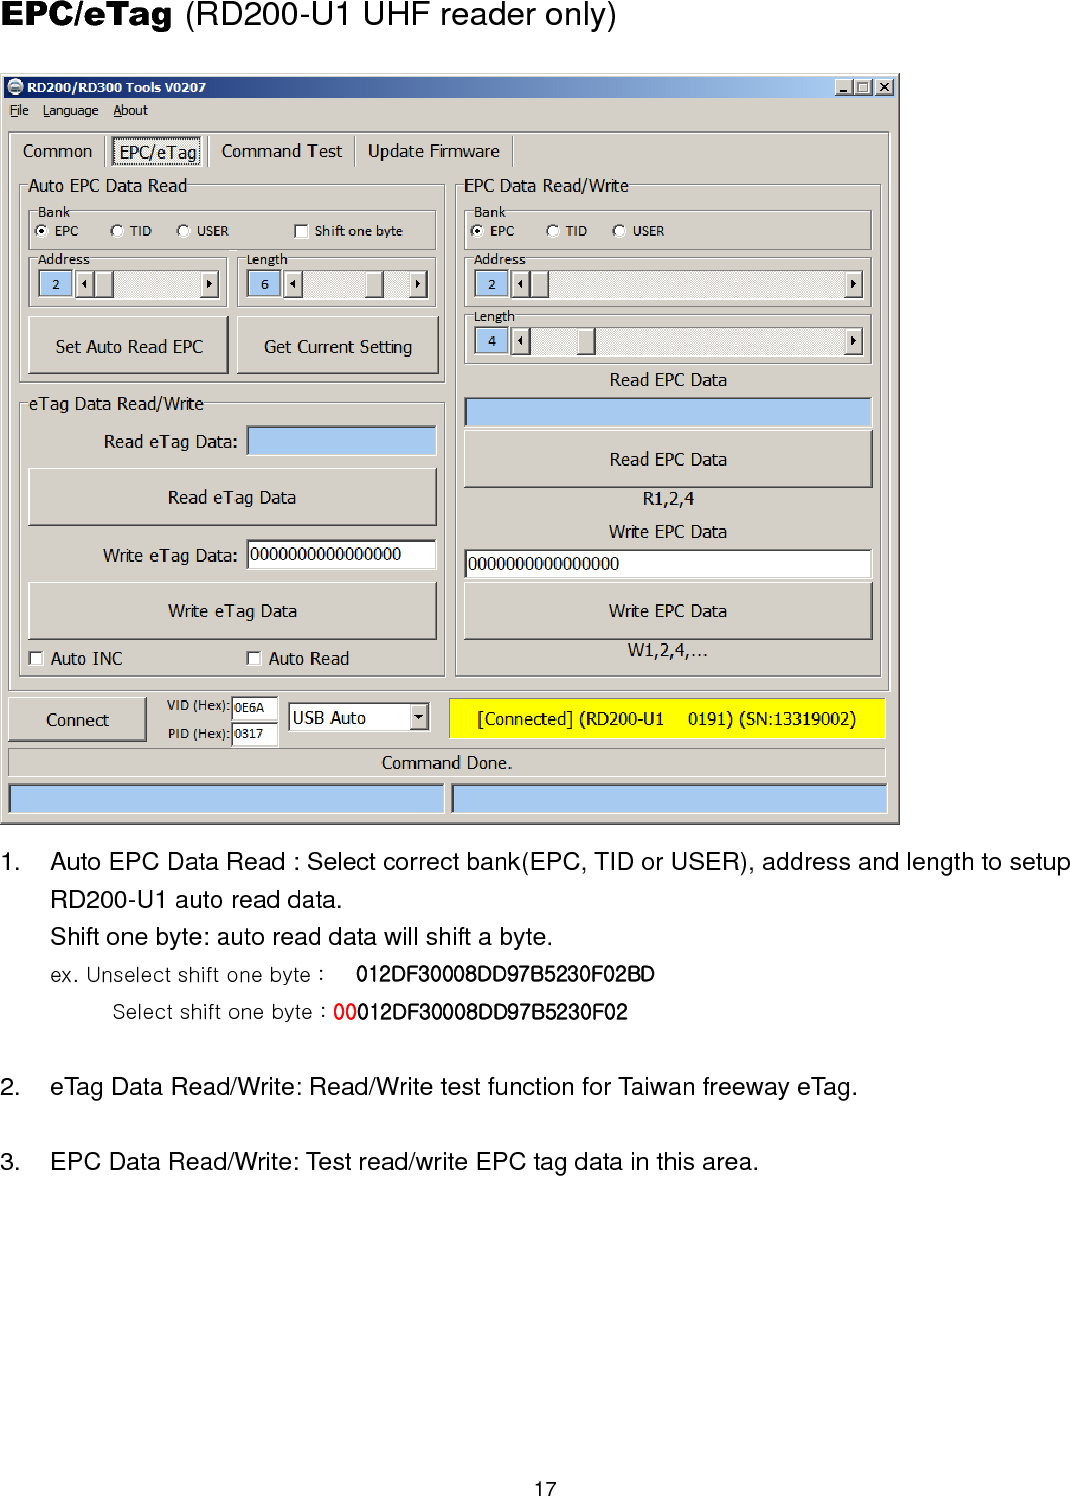 17  EPC/eTag (RD200-U1 UHF reader only)  1.  Auto EPC Data Read : Select correct bank(EPC, TID or USER), address and length to setup RD200-U1 auto read data. Shift one byte: auto read data will shift a byte. ex. Unselect shift one byte :      012DF30008DD97B5230F02BD             Select shift one byte : 00012DF30008DD97B5230F02  2.  eTag Data Read/Write: Read/Write test function for Taiwan freeway eTag.  3.  EPC Data Read/Write: Test read/write EPC tag data in this area. 